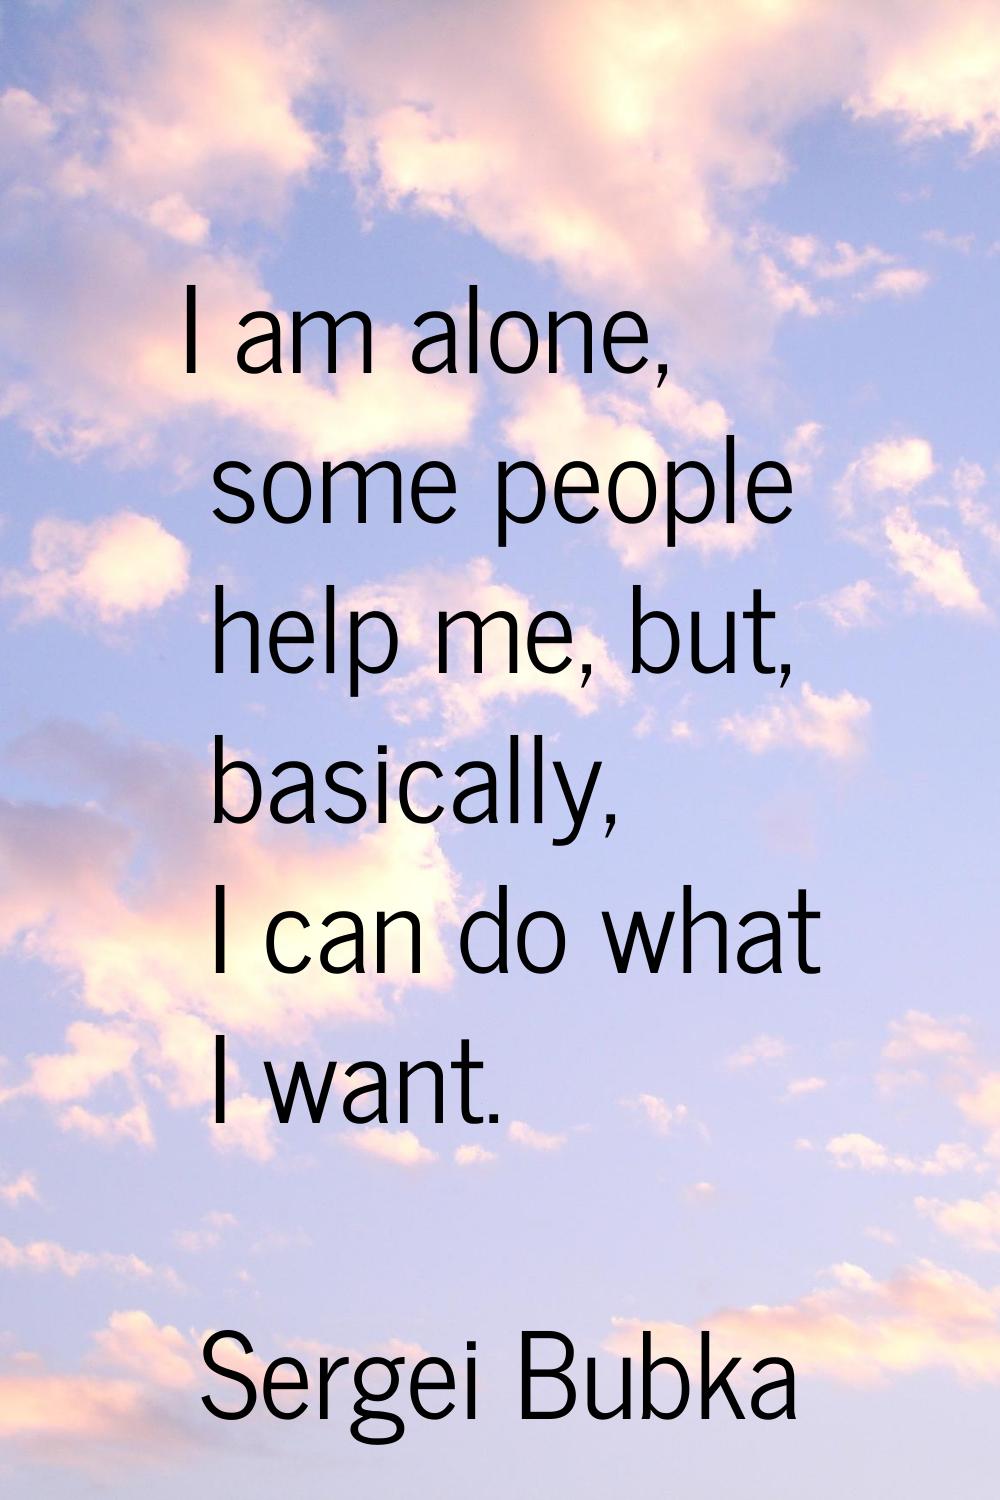 I am alone, some people help me, but, basically, I can do what I want.